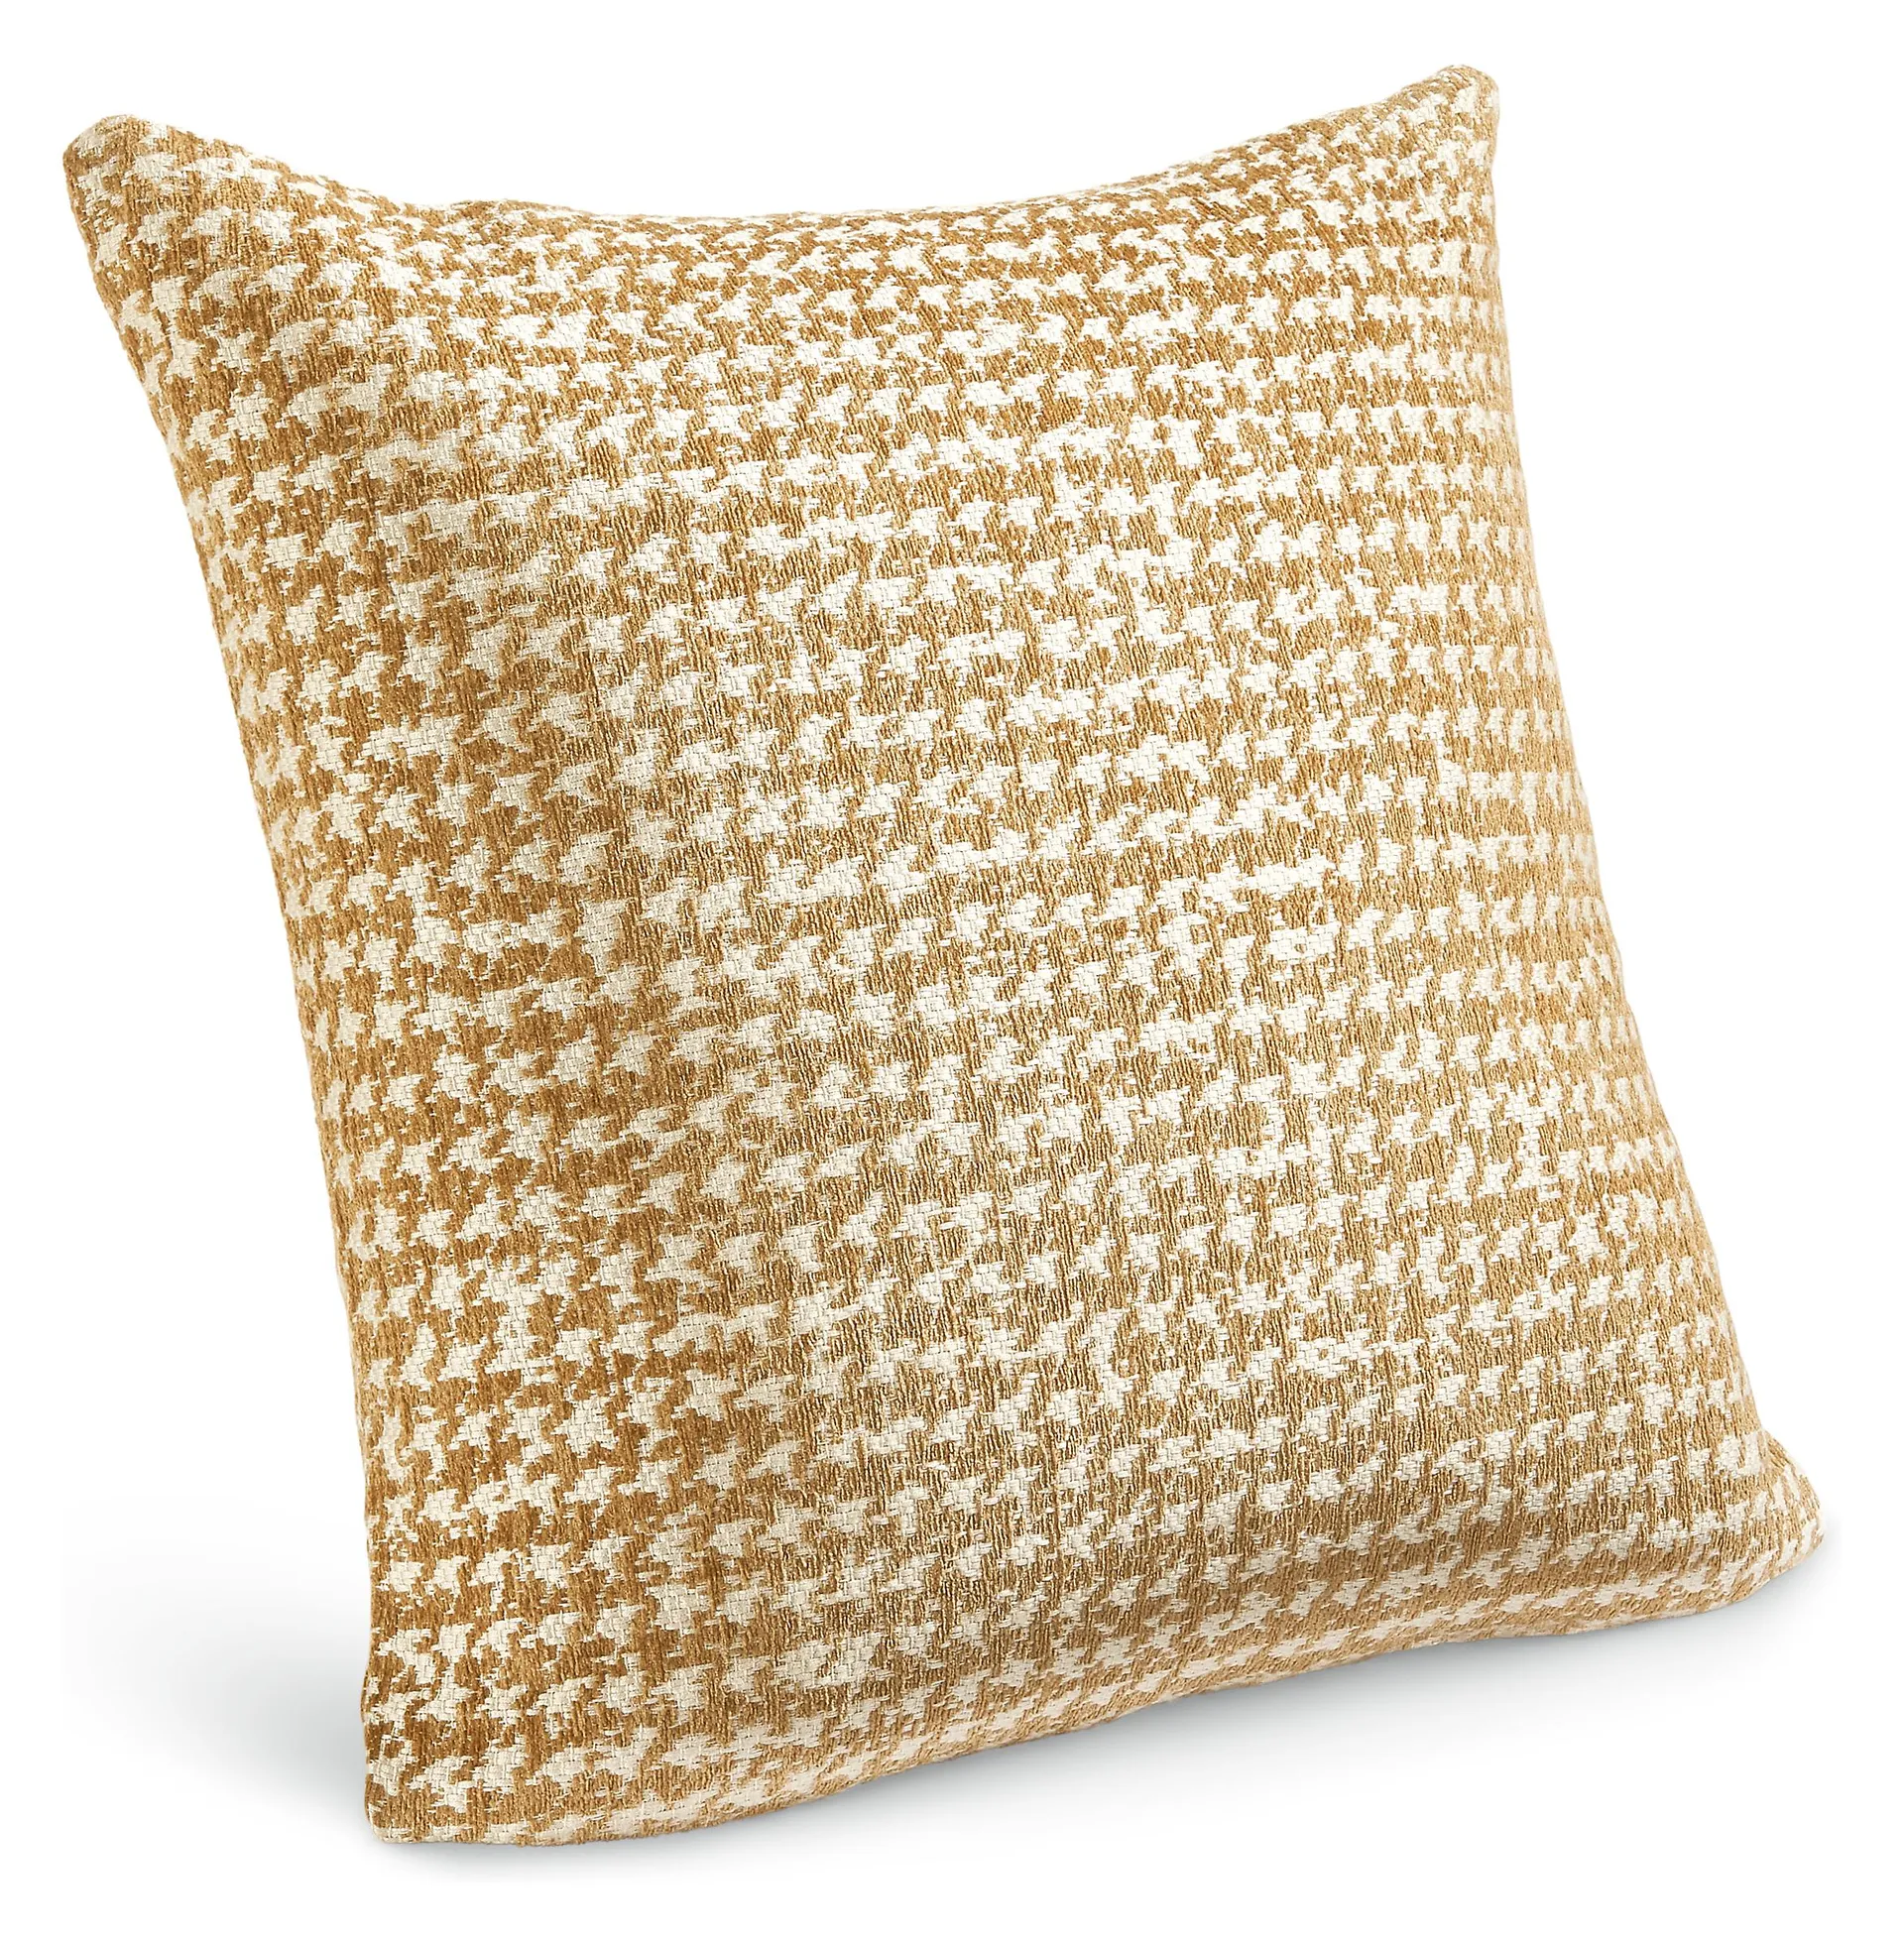 Barnes 20w 20h Throw Pillow Cover in Camel/White